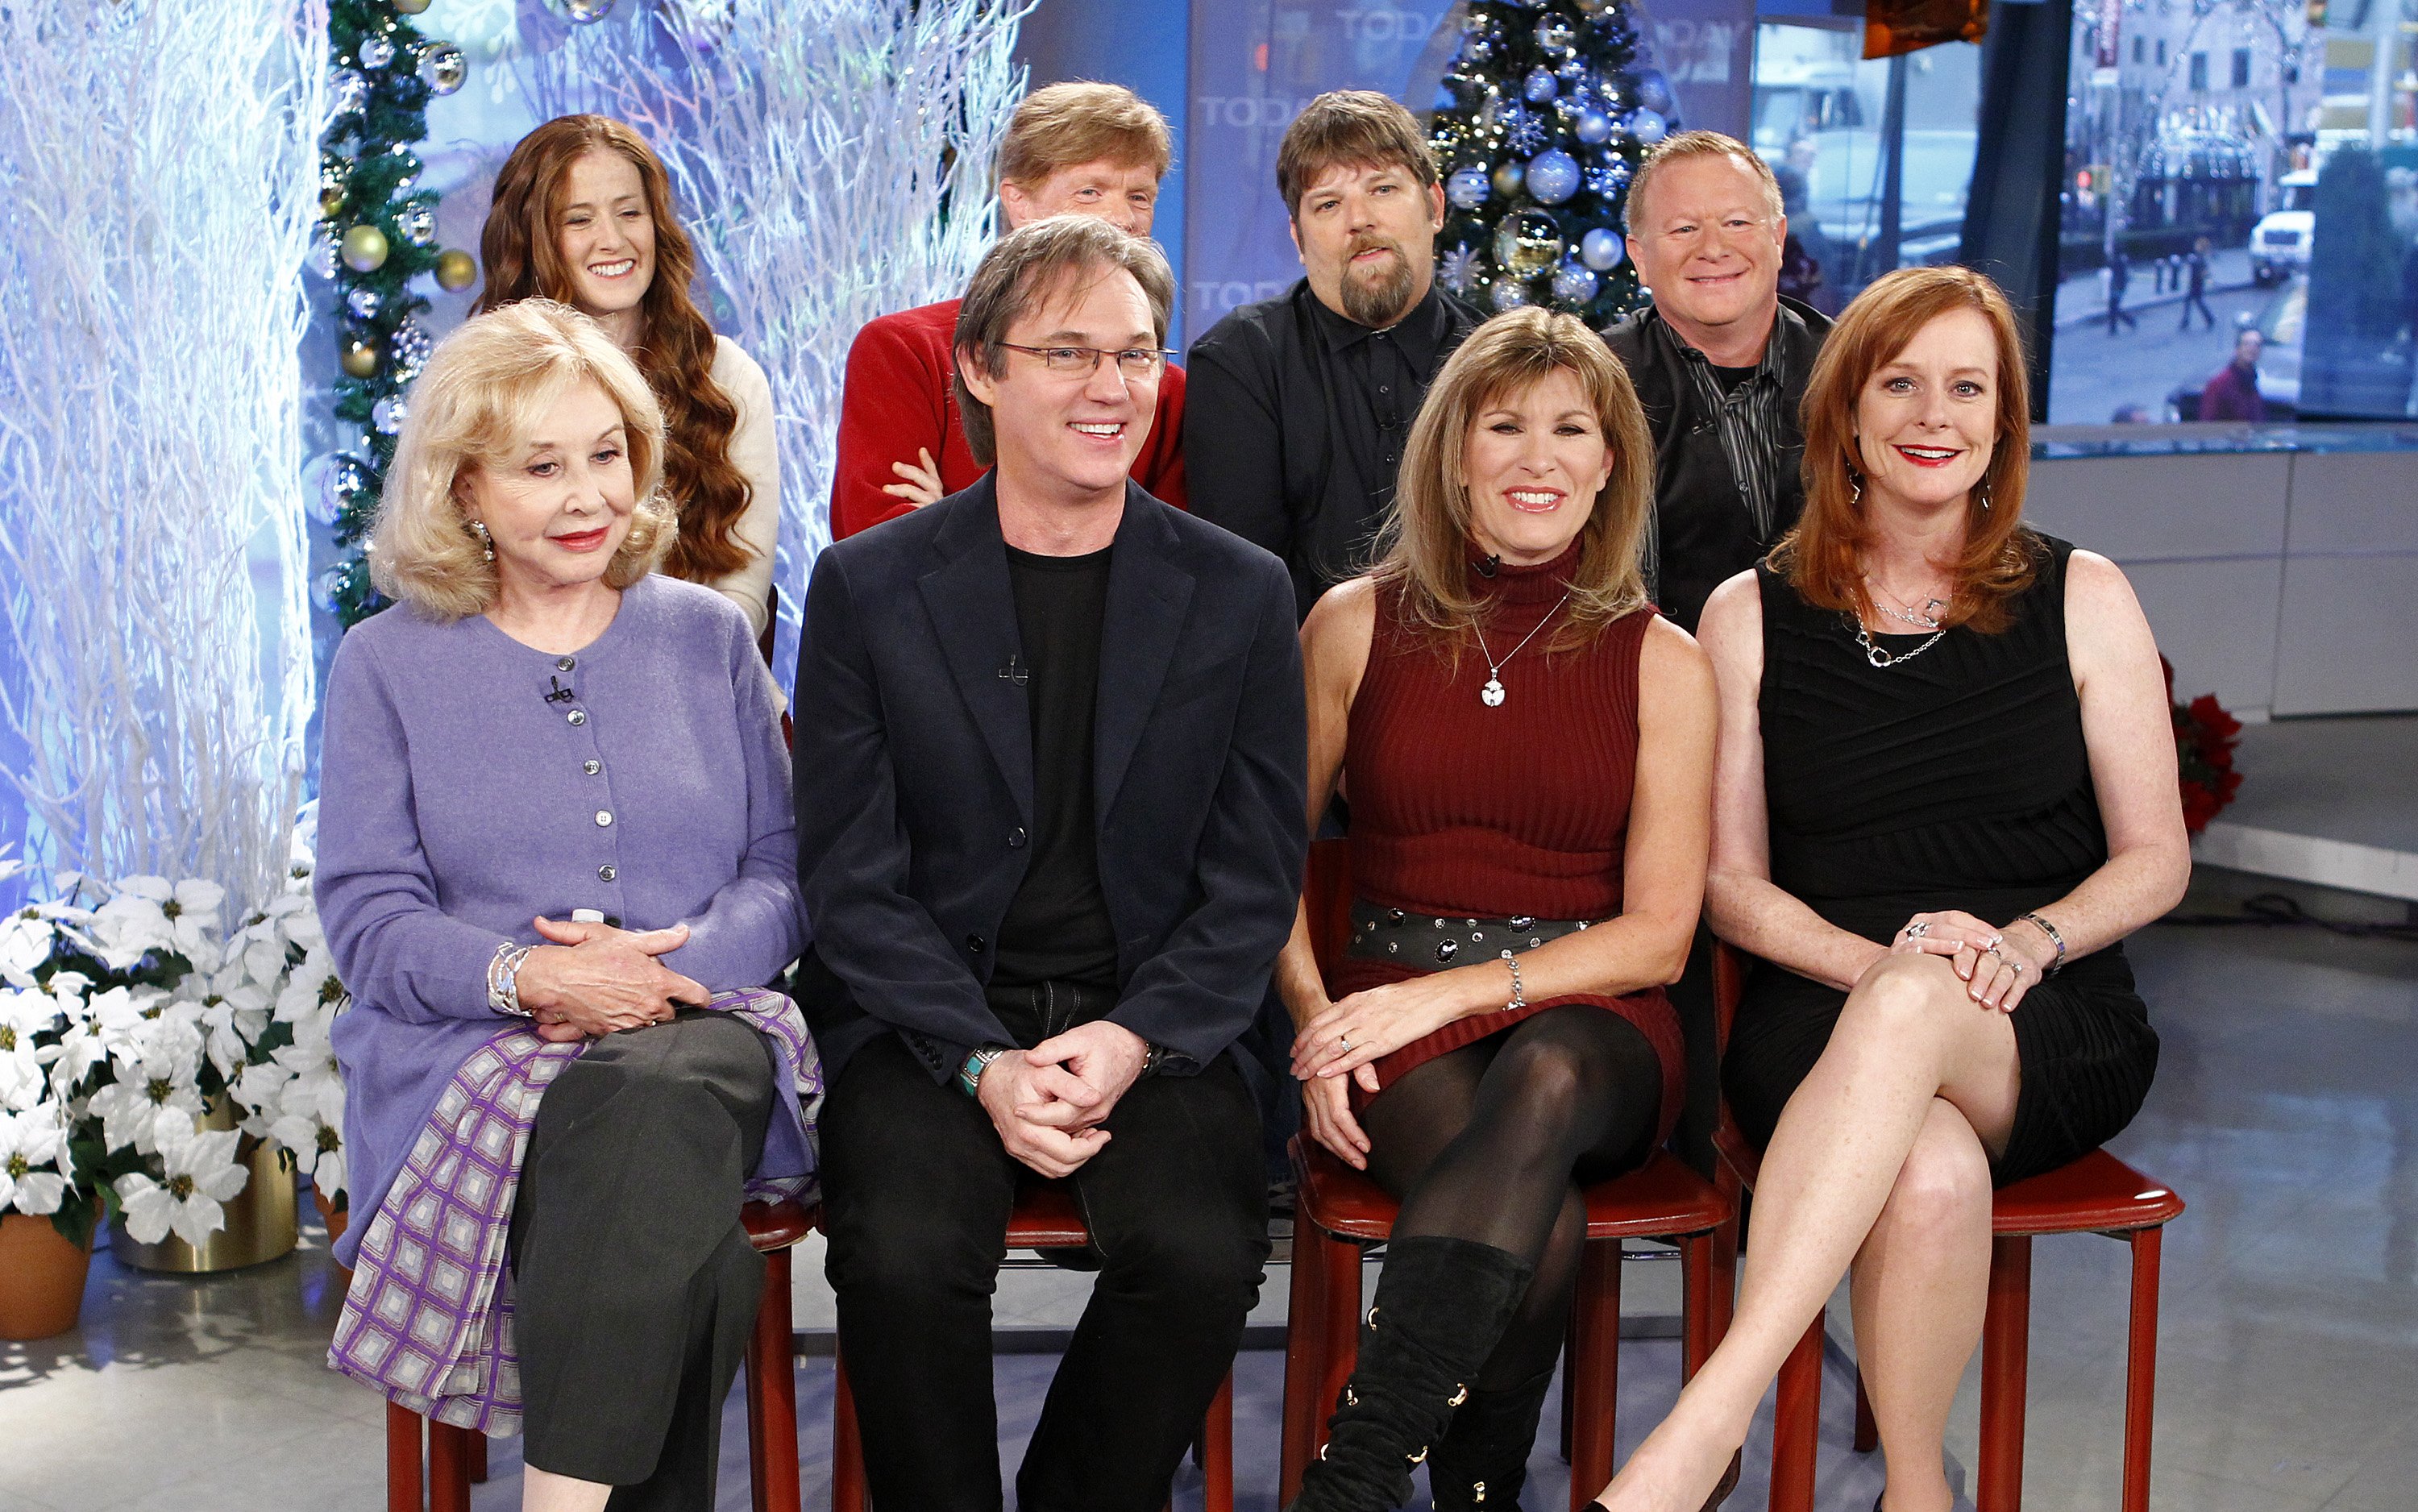 The cast of TV show, "The Watsons" appear on NBC News' "Today" show | Source: Getty Images